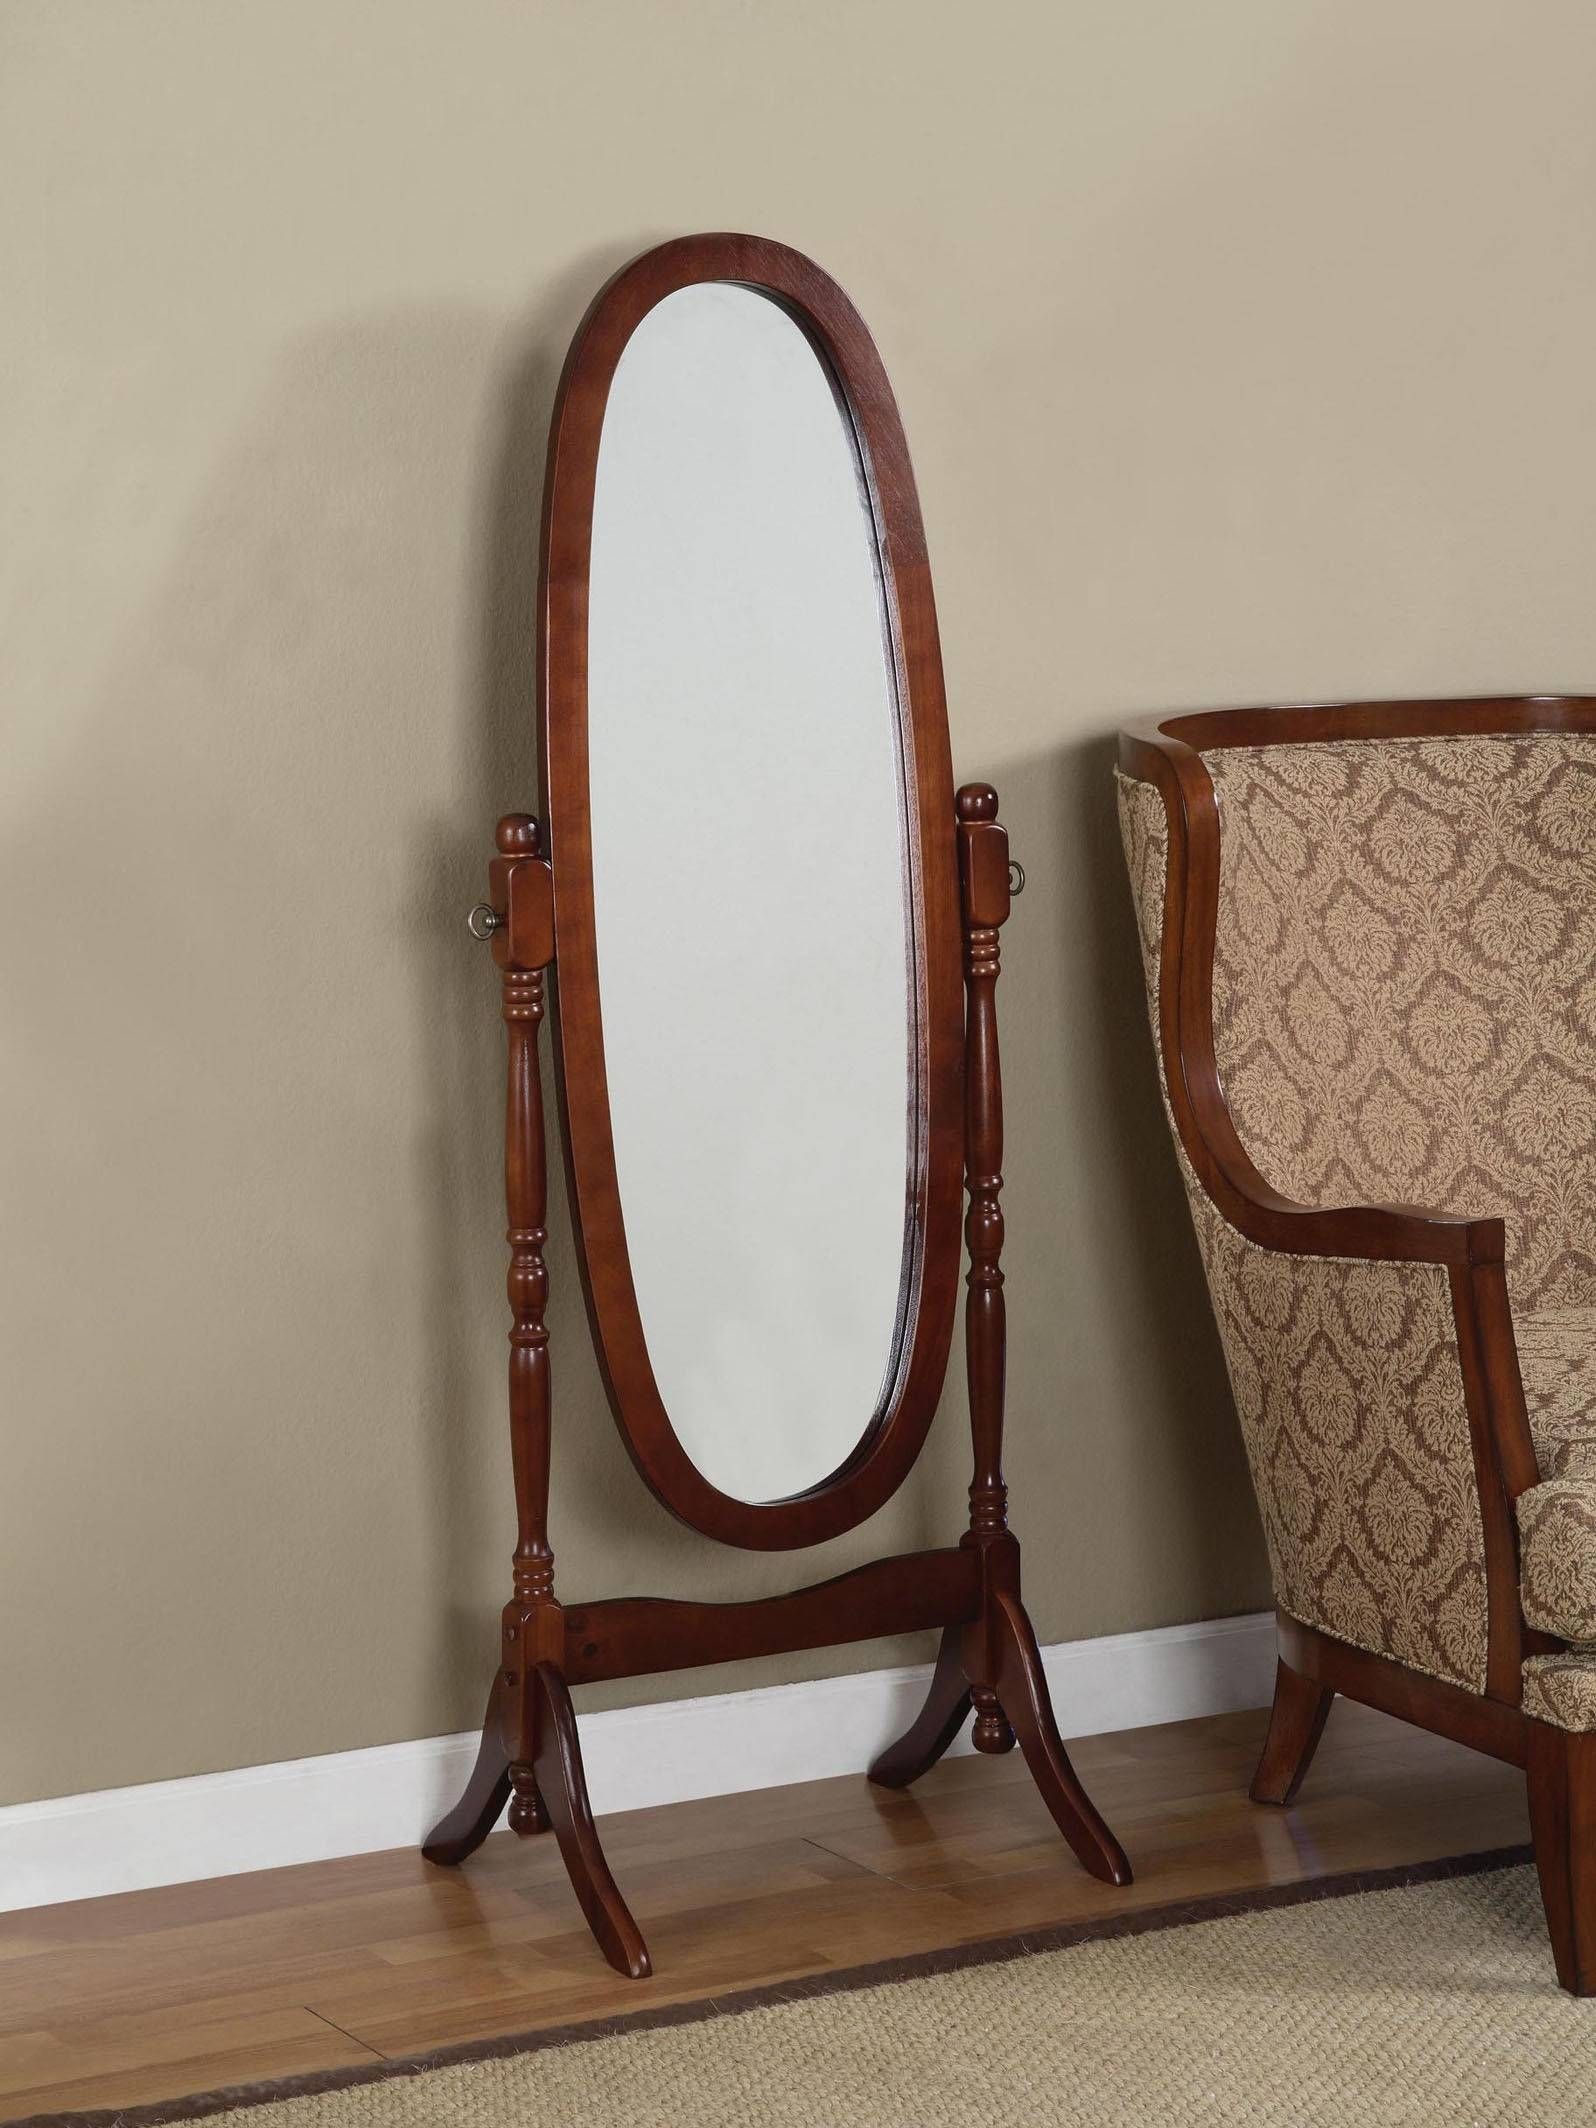 2020 Latest Full Length Vintage Standing Mirrors